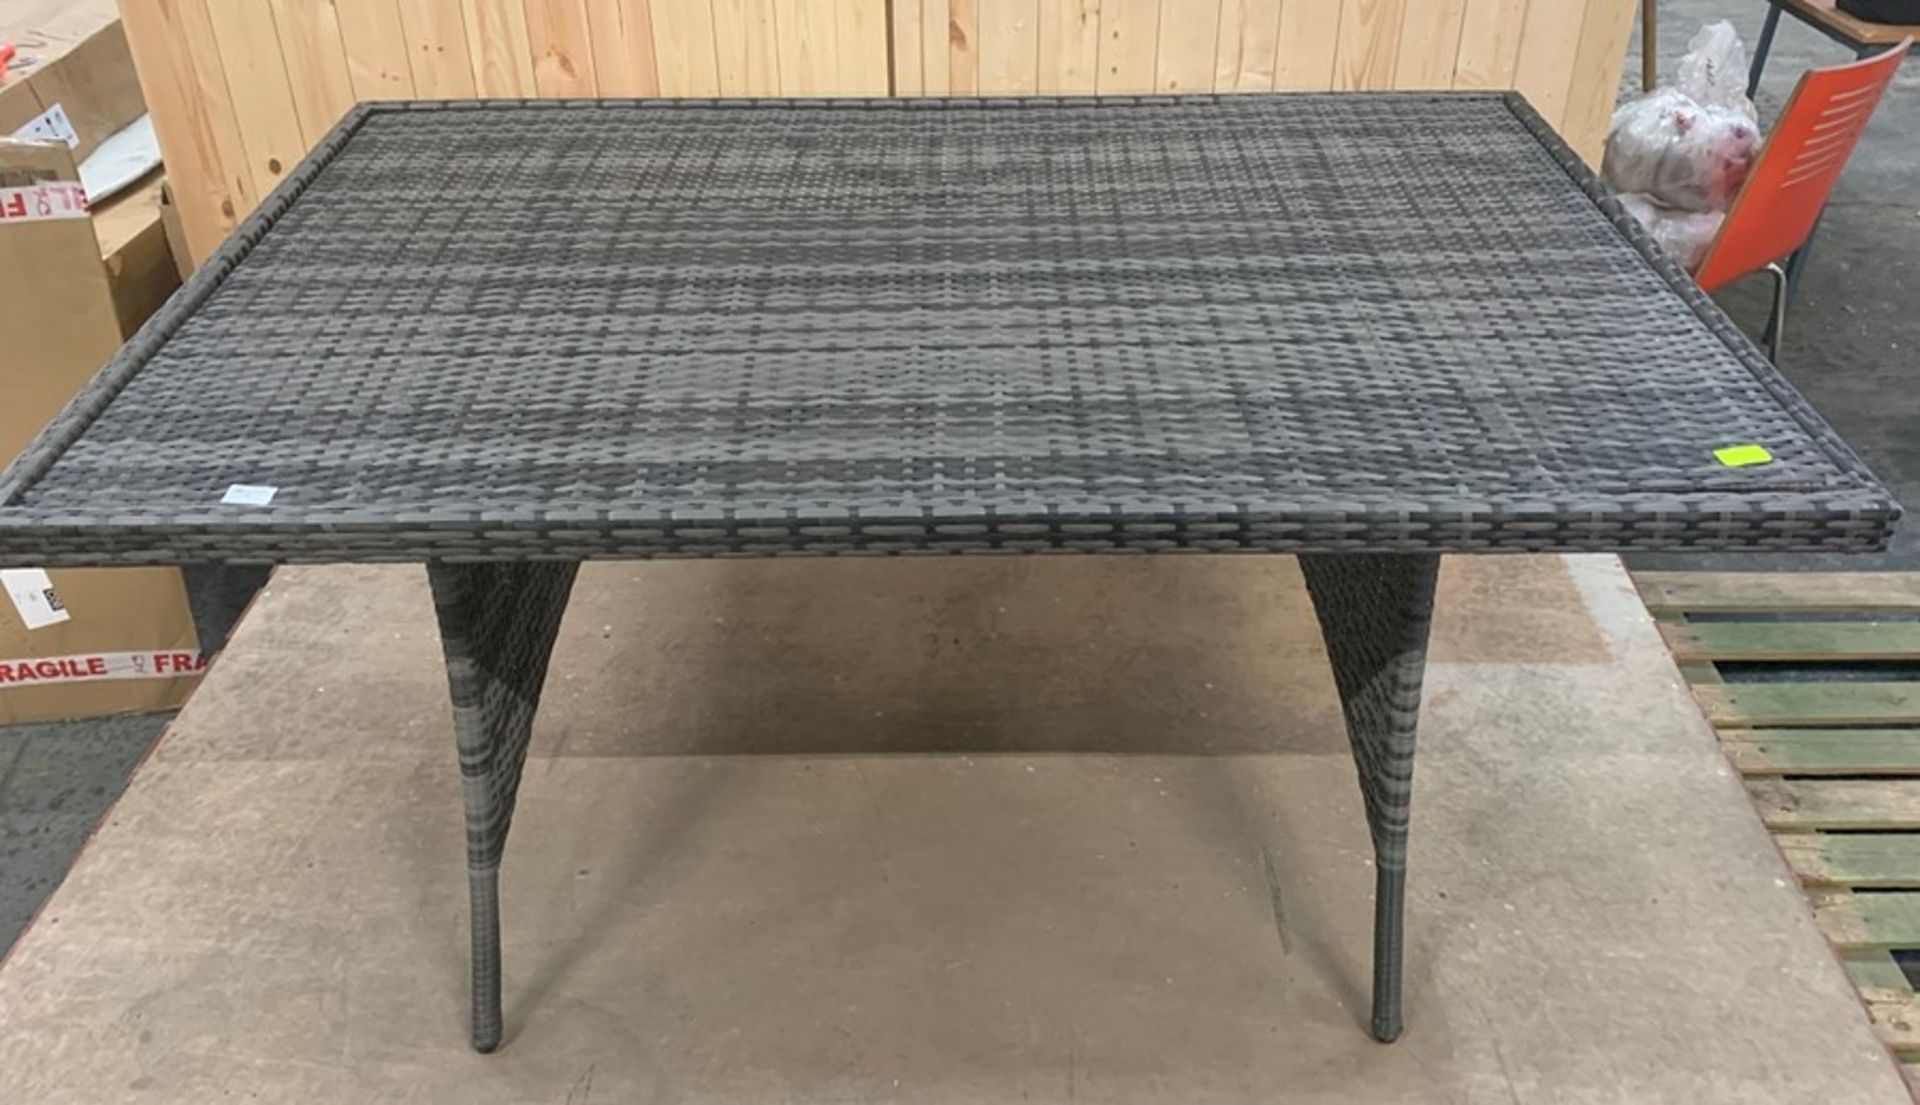 1 RATTAN GARDEN TABLE IN GREY/GREY / RRP £179.99 (PUBLIC VIEWING AVAILABLE)